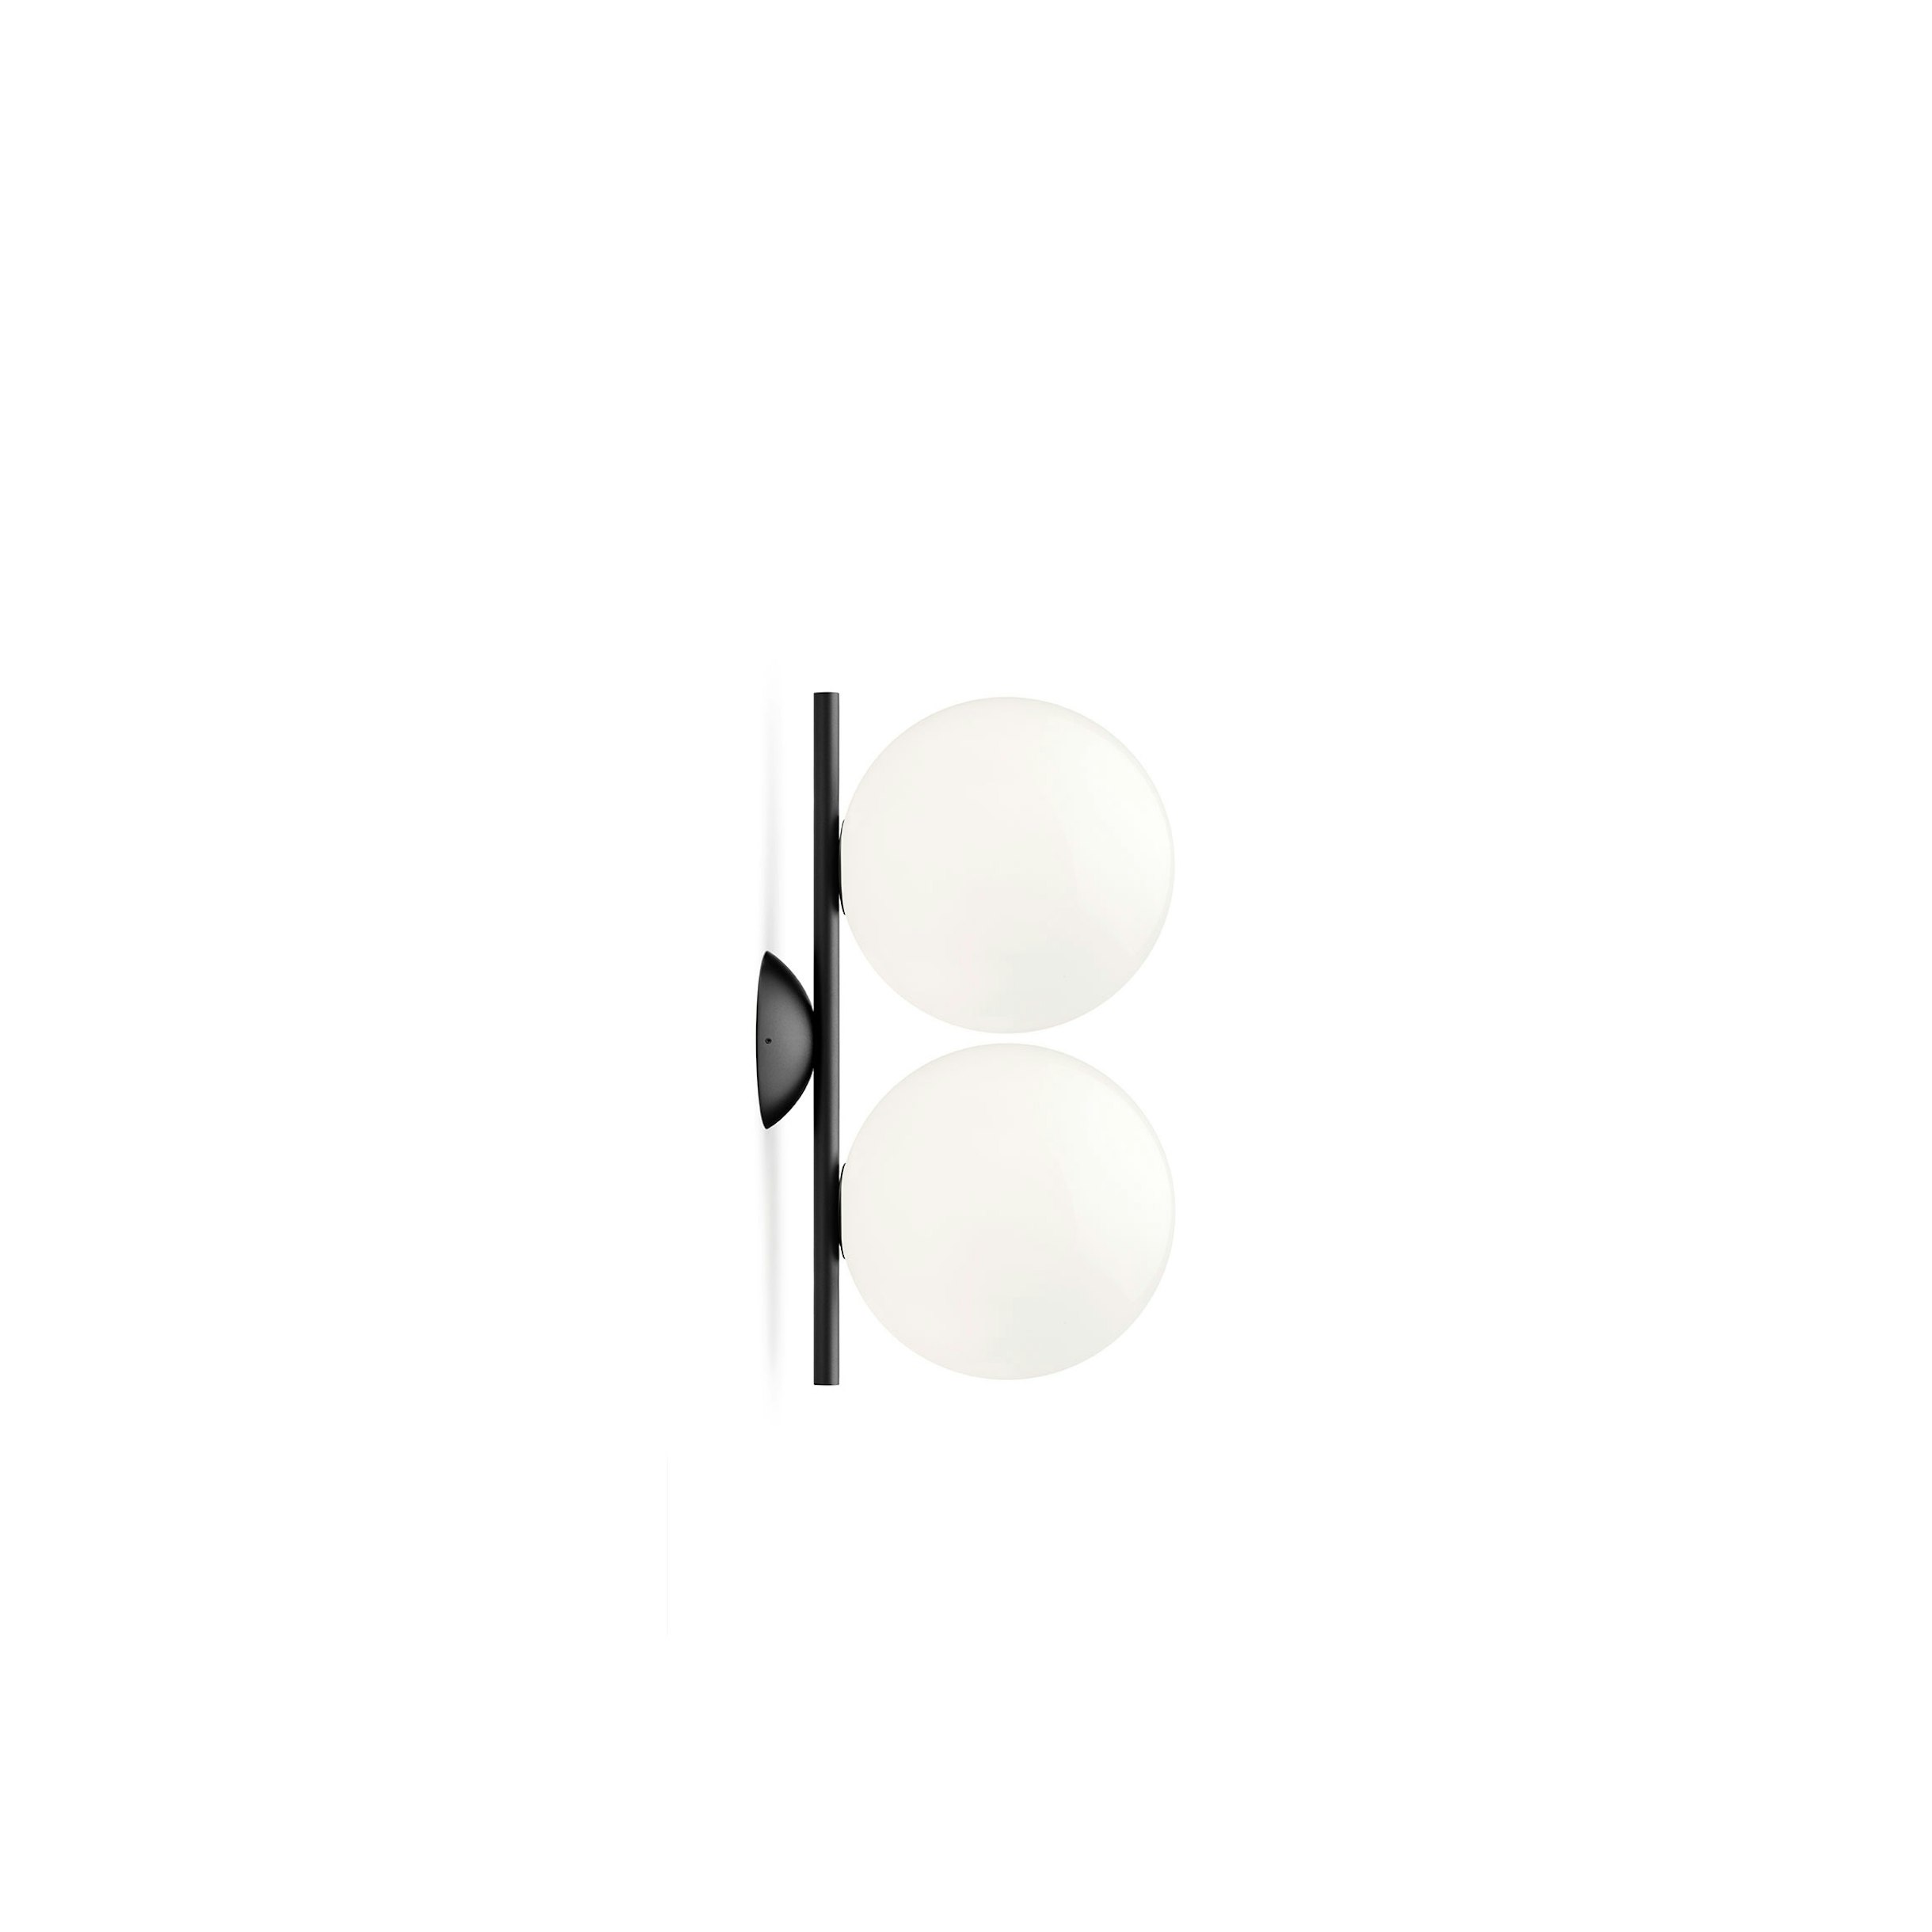 Compose detail Observation IC Lights C/W1 Double | Flos